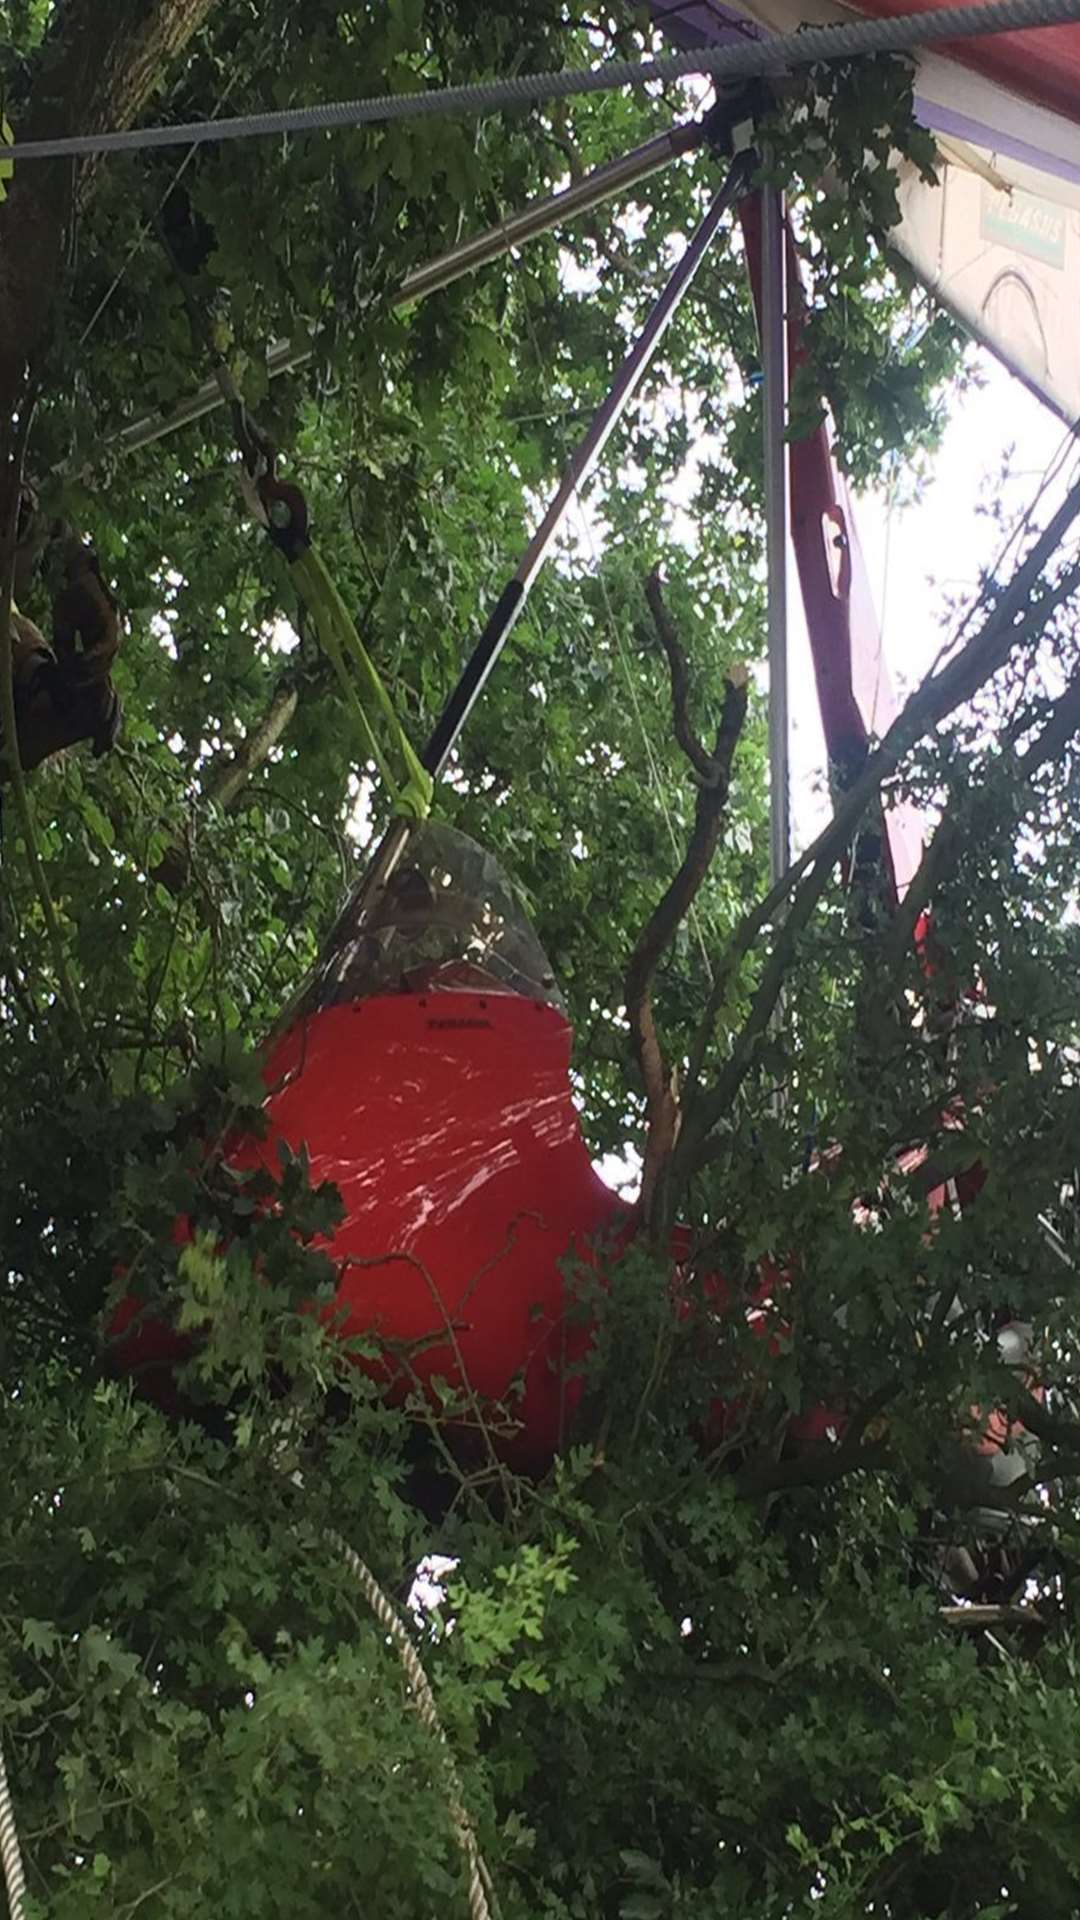 The plane was became wedged in the tree 15ft above the ground. Picture: SECAmbHart